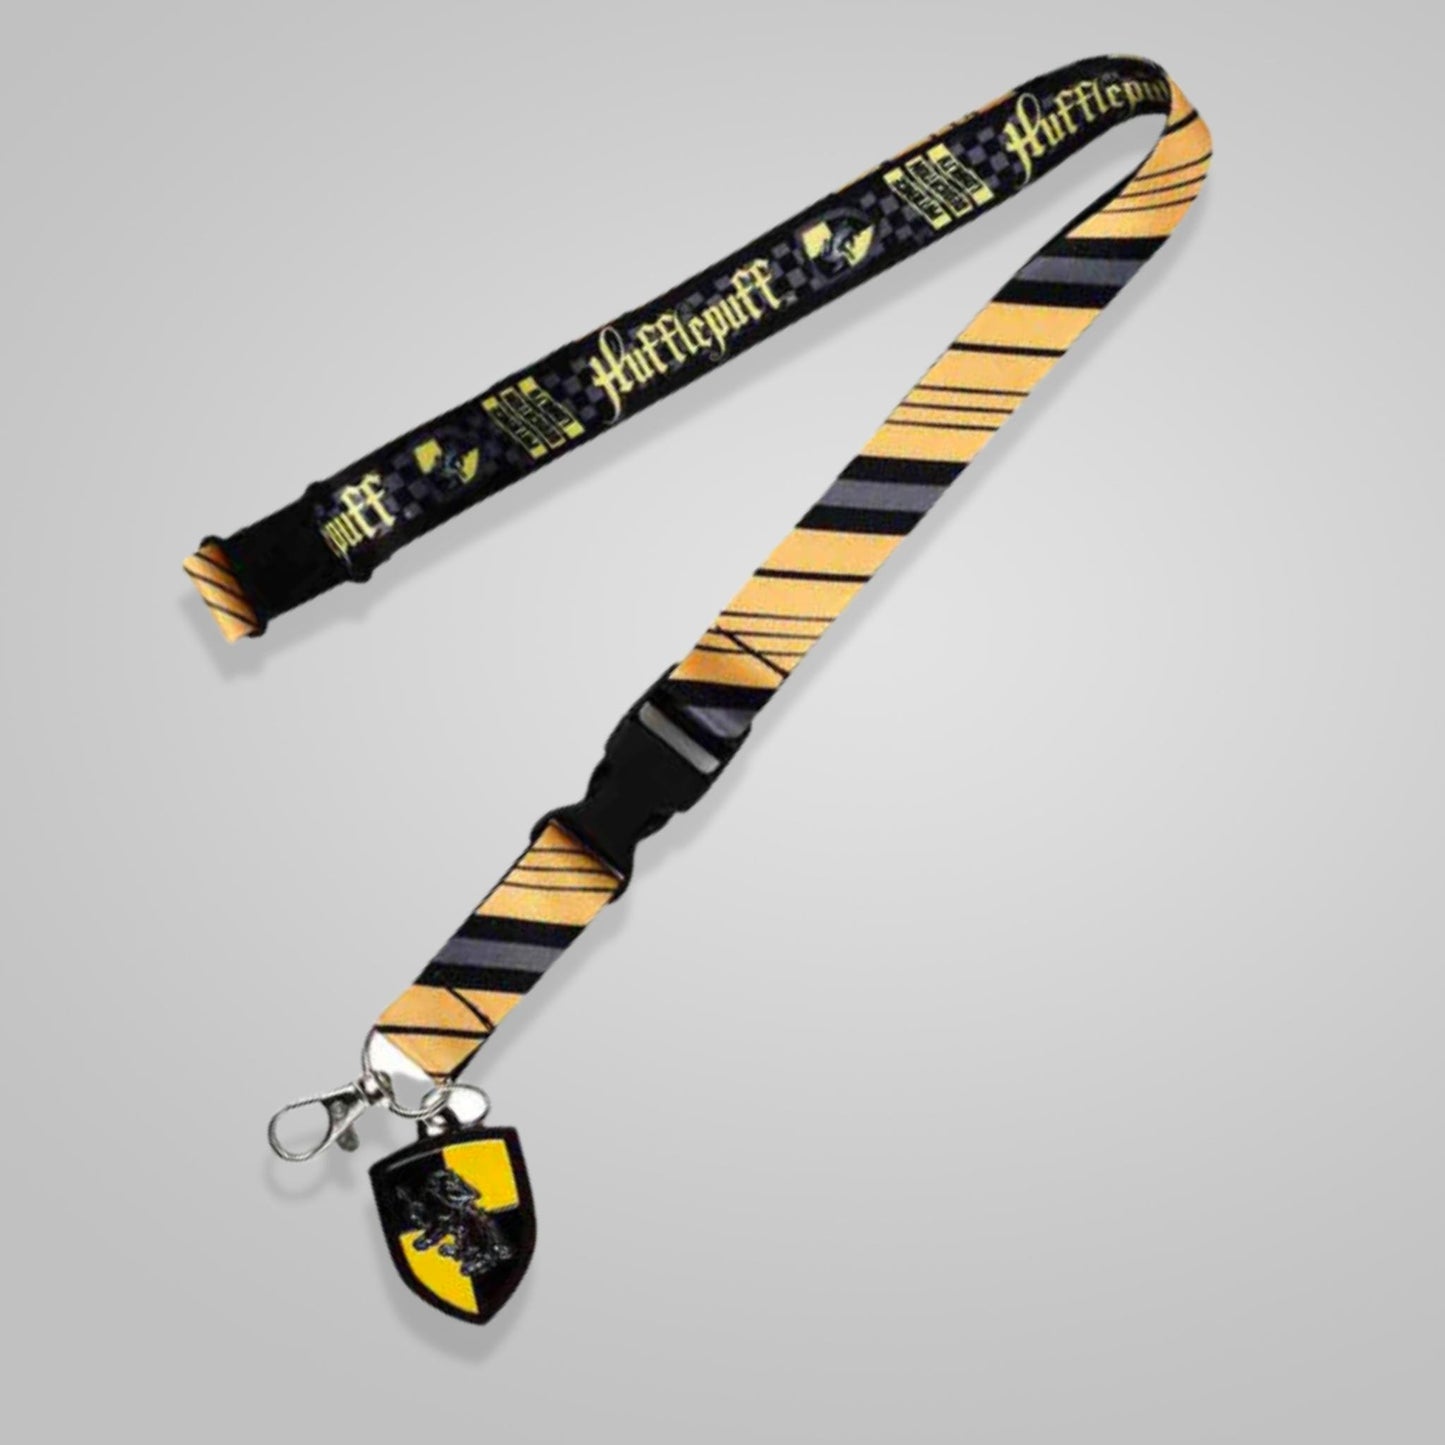  Harry Potter Hogwarts Lanyard with Clear ID Badge Holder,  Rubber Charm, and Collectible Sticker : Office Products